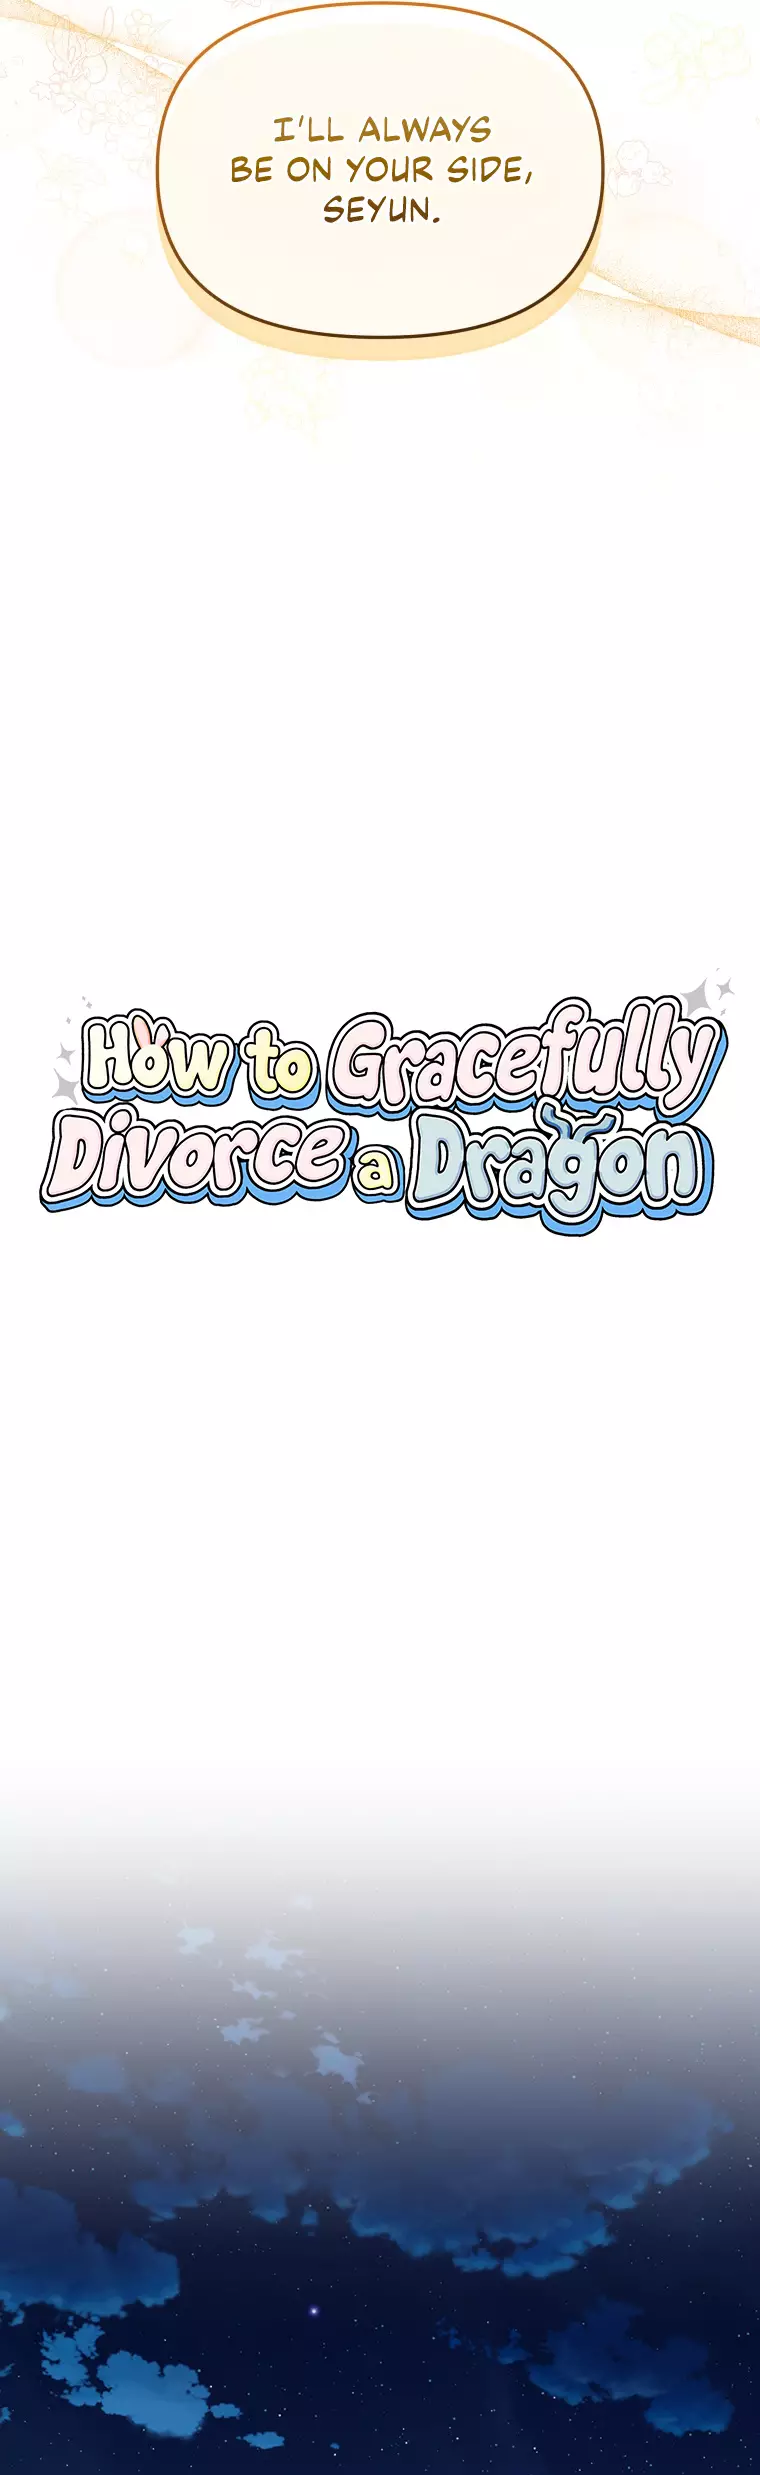 How To Gracefully Divorce A Dragon - 34 page 24-6b47fd28